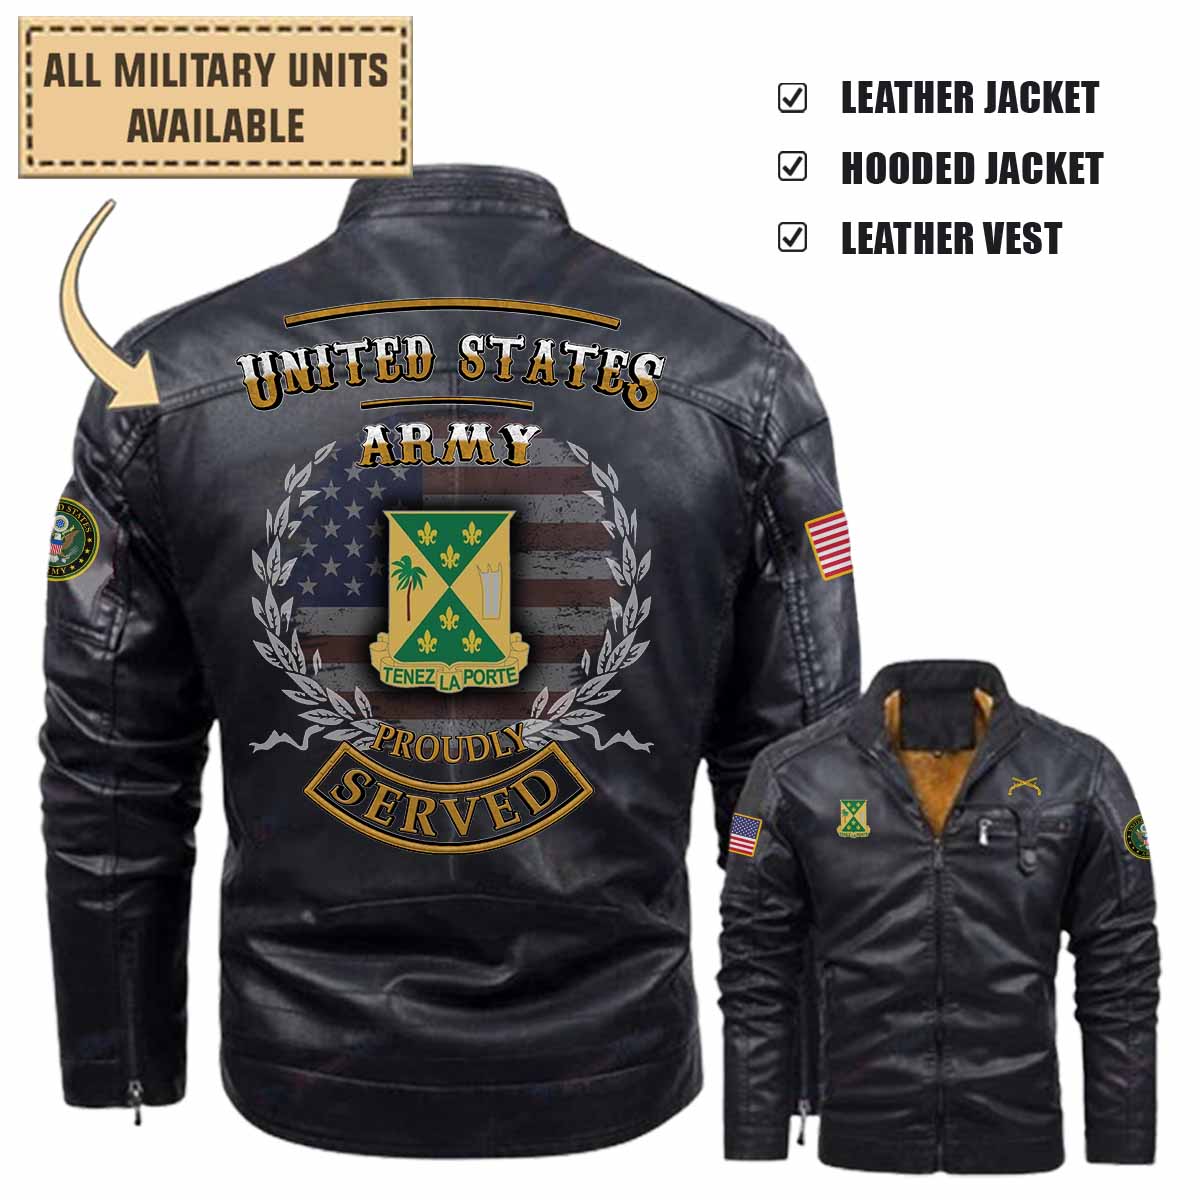 759th MP BN 759th Military Police Battalion_Military Leather Jacket and Vest